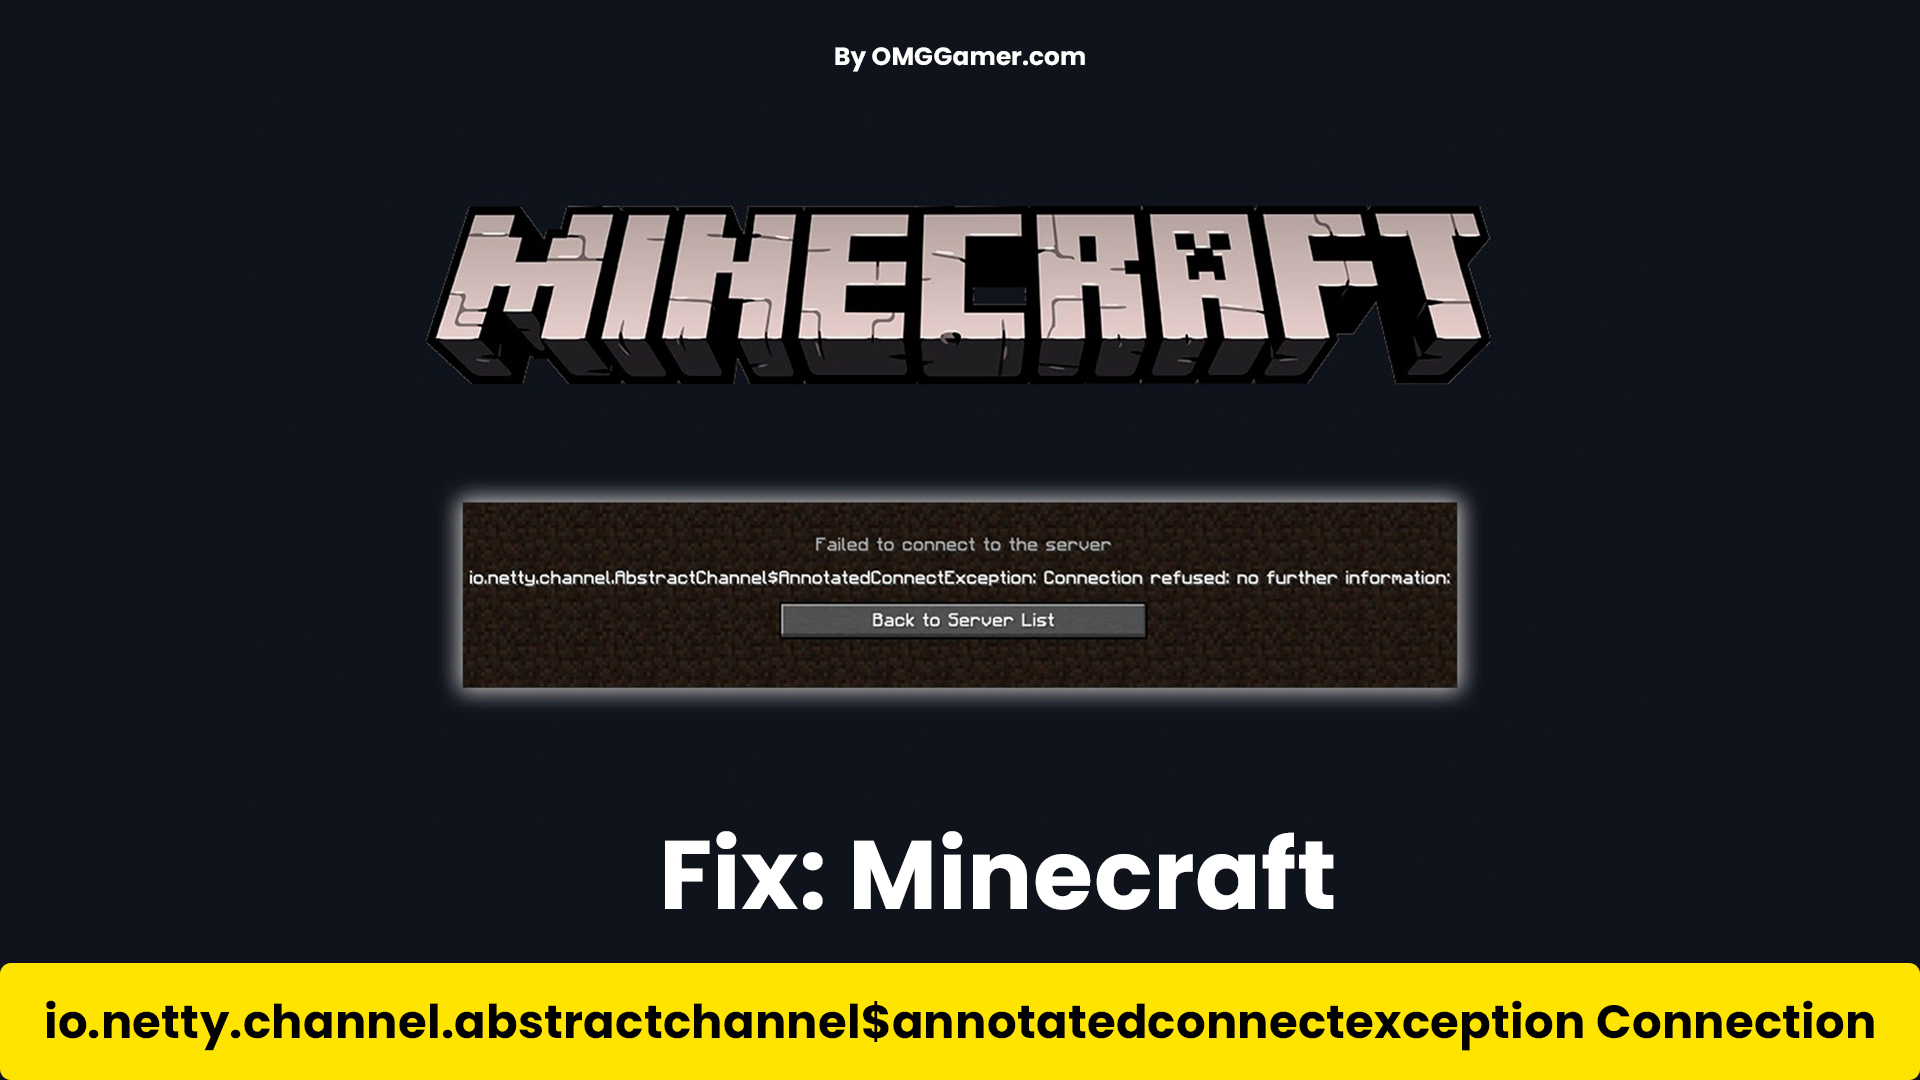 Fix: Minecraft io.netty.channel.abstractchannel$annotatedconnectexception Connection